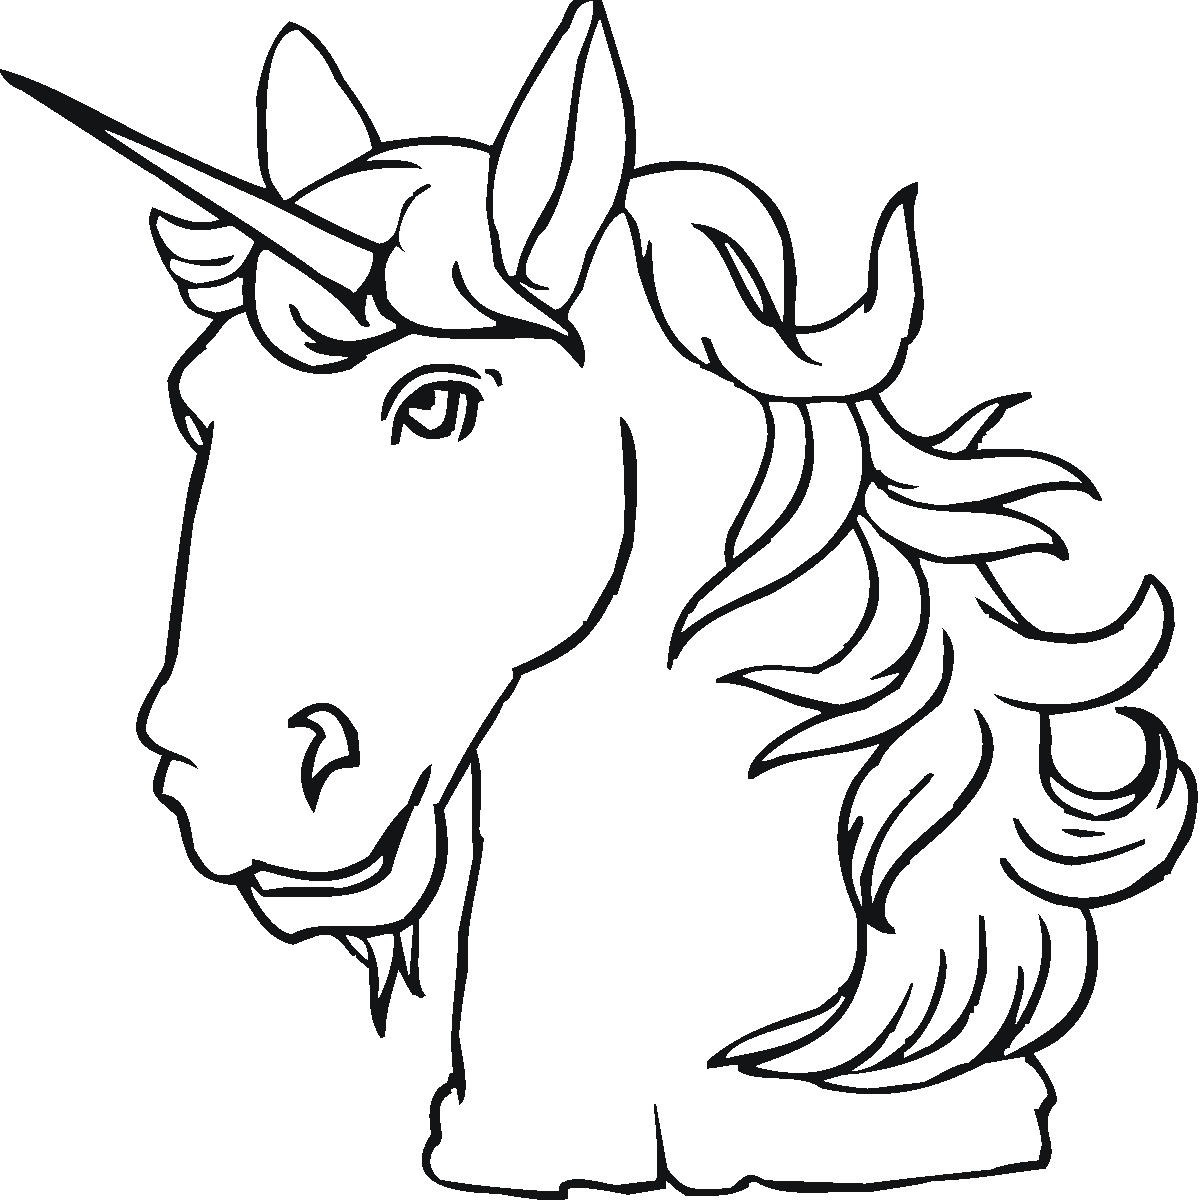 Unicorn and Girl Coloring Page - Free Coloring Pages Online